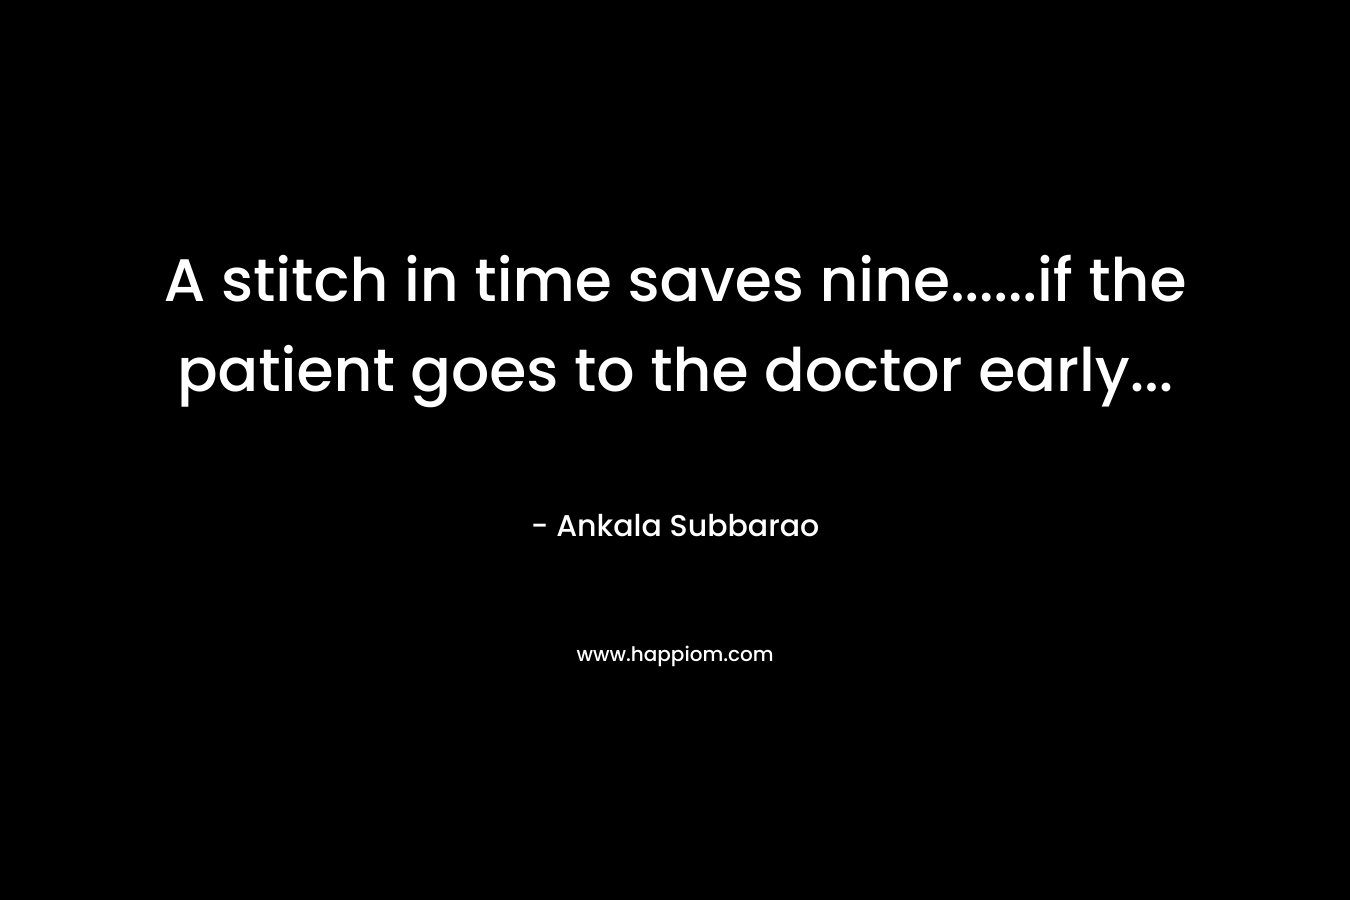 A stitch in time saves nine……if the patient goes to the doctor early… – Ankala Subbarao